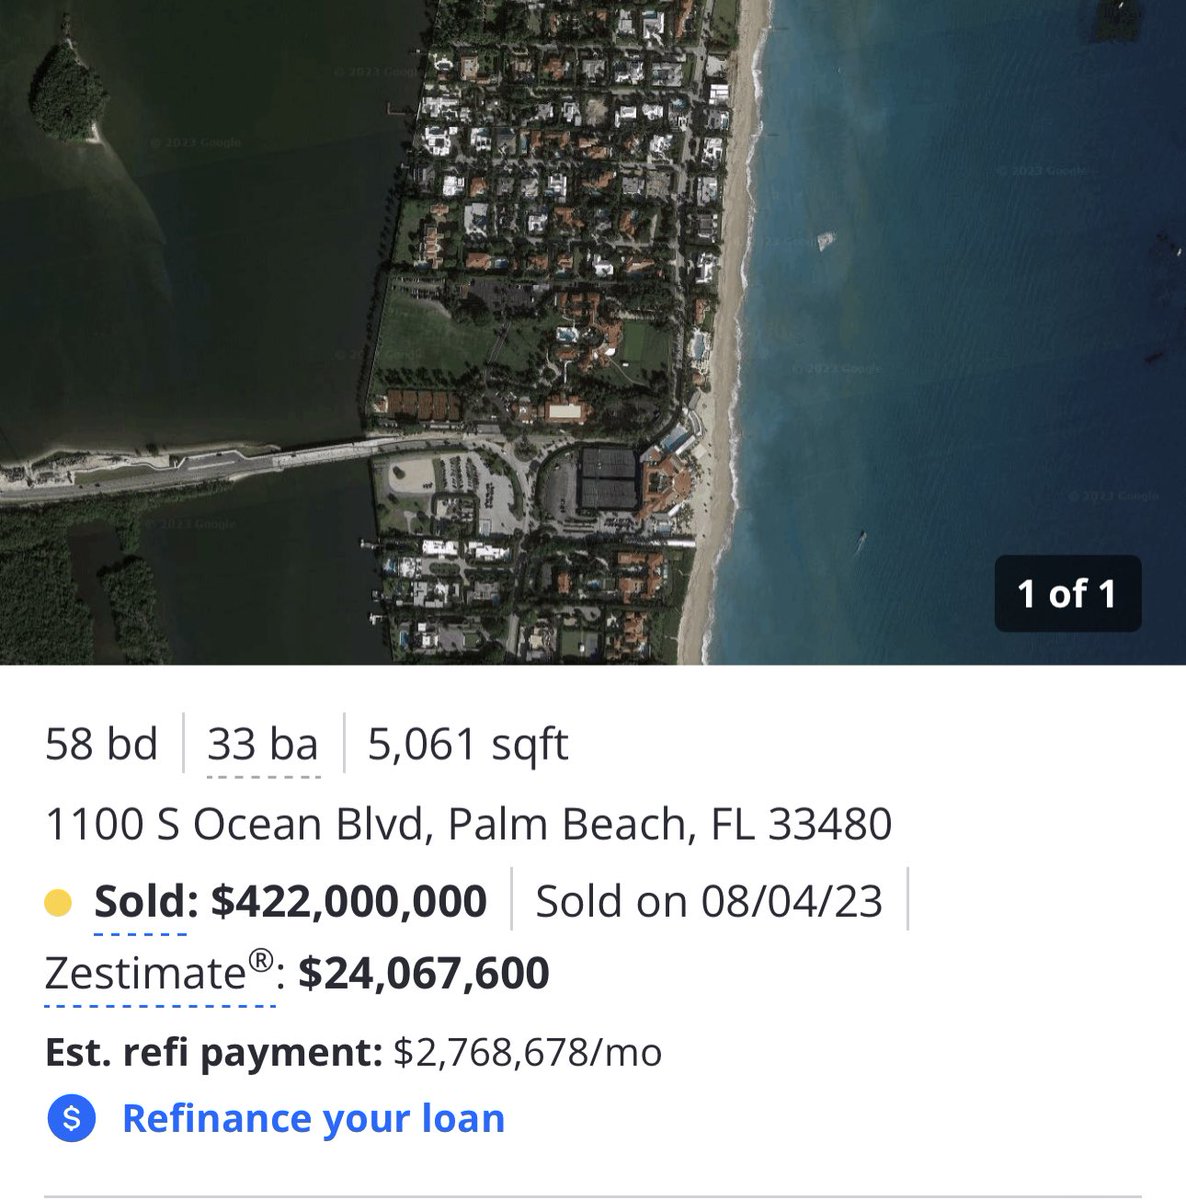 So Trump secretly sold Mar-a-Lago to Junior for $422 million when Zillow has it valued at $24 million. Nothing to see here right, gee I wonder where Junior got the money. Anybody at DOJ seeing this. Jesus Christ